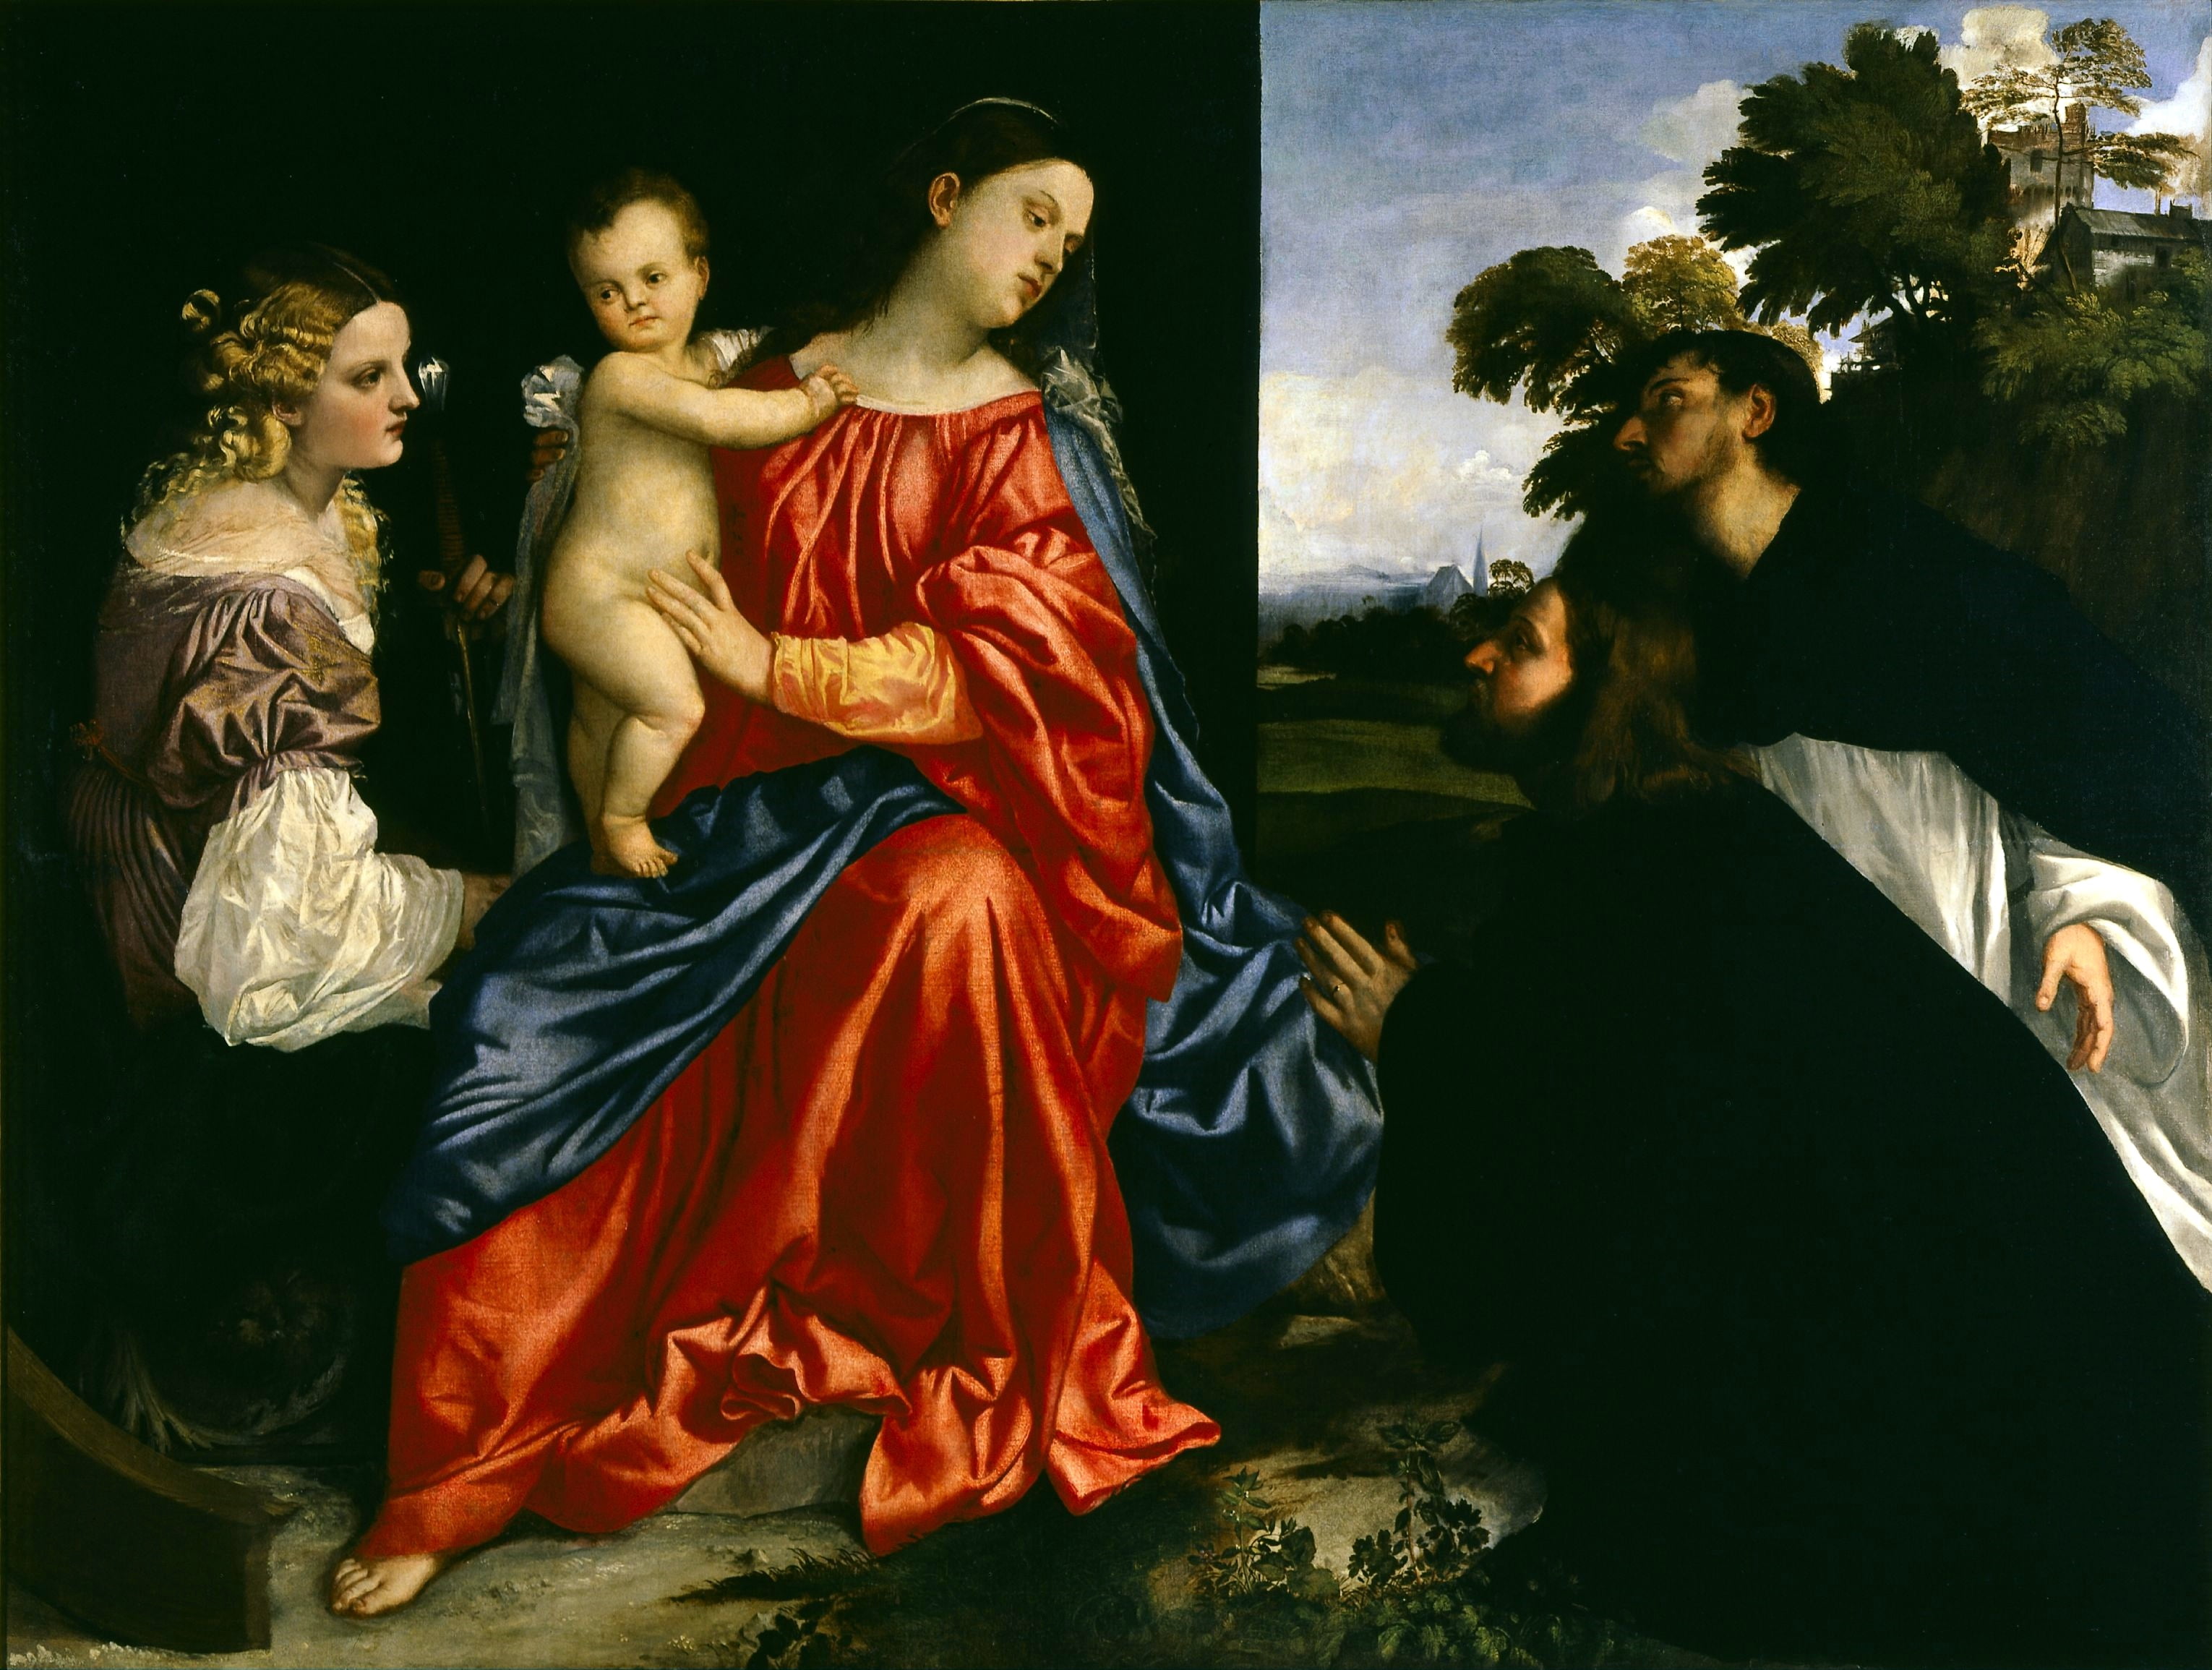 Titian Vecellio, The Madonna and child, 1512-1516, St Dominic and a donor